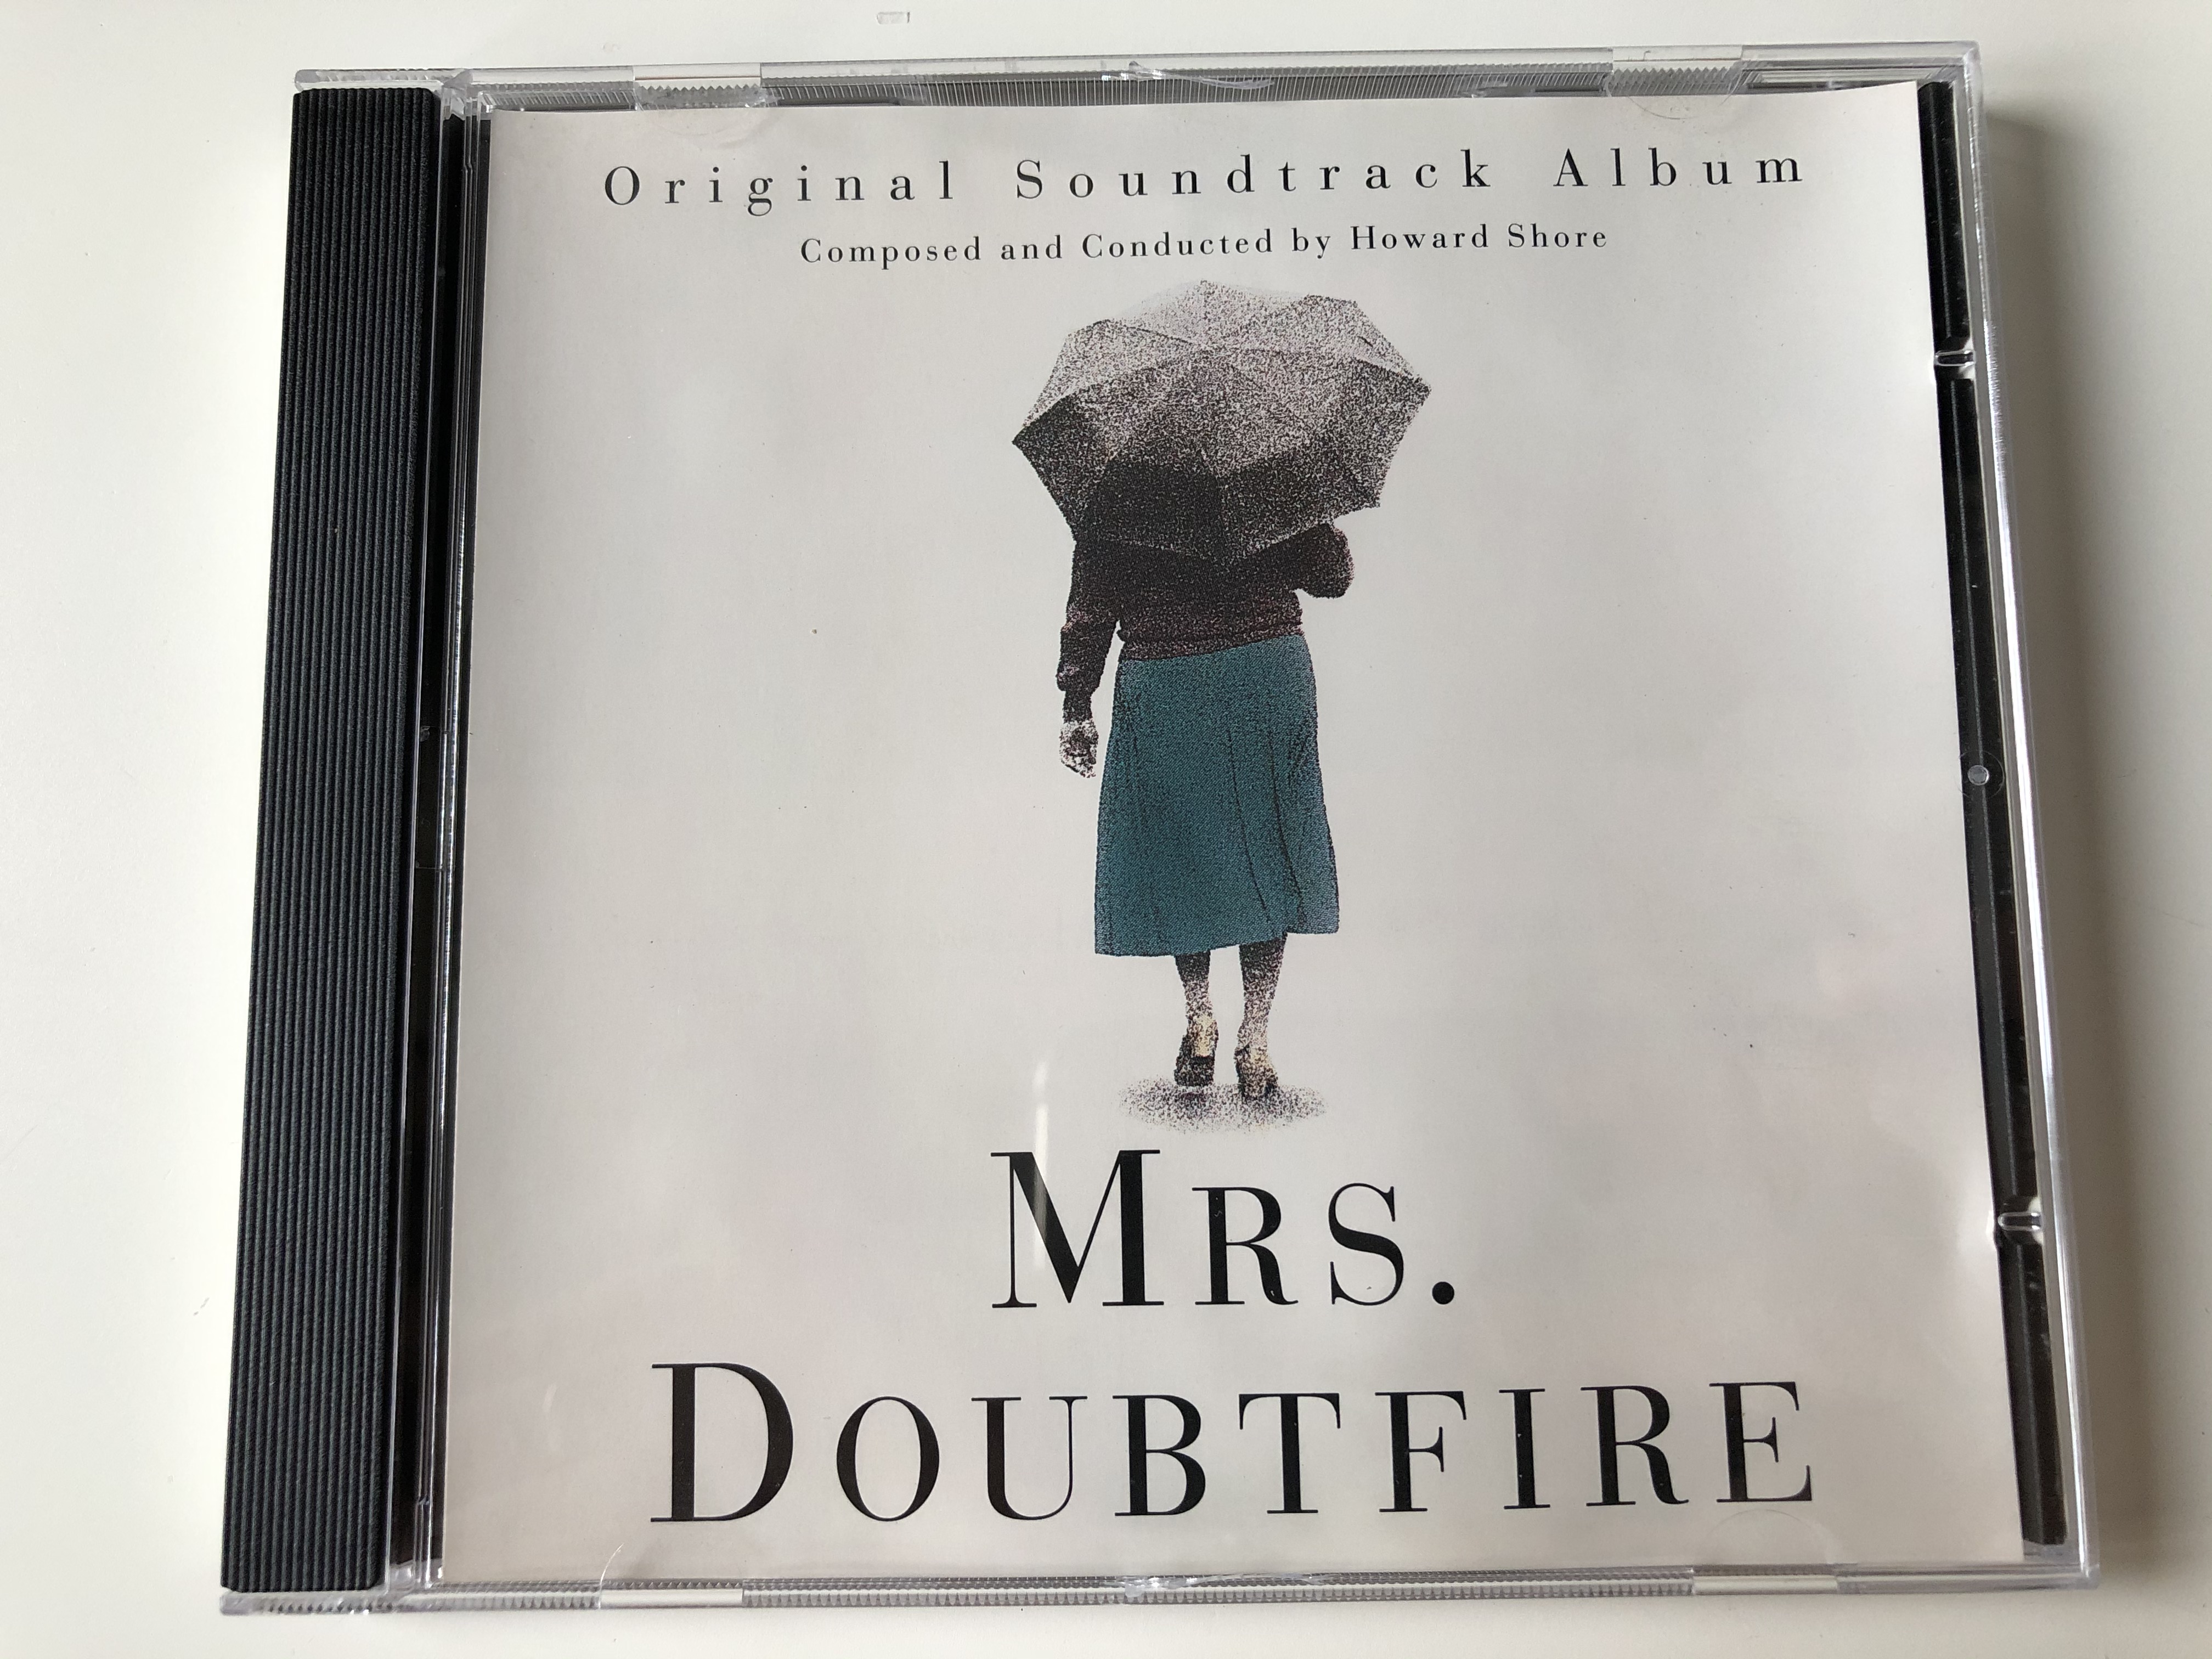 mrs-doubtfire-original-soundtrack-album-composed-and-conducted-by-howard-shore-arista-audio-cd-1993-stereo-07822-11015-2-1-.jpg